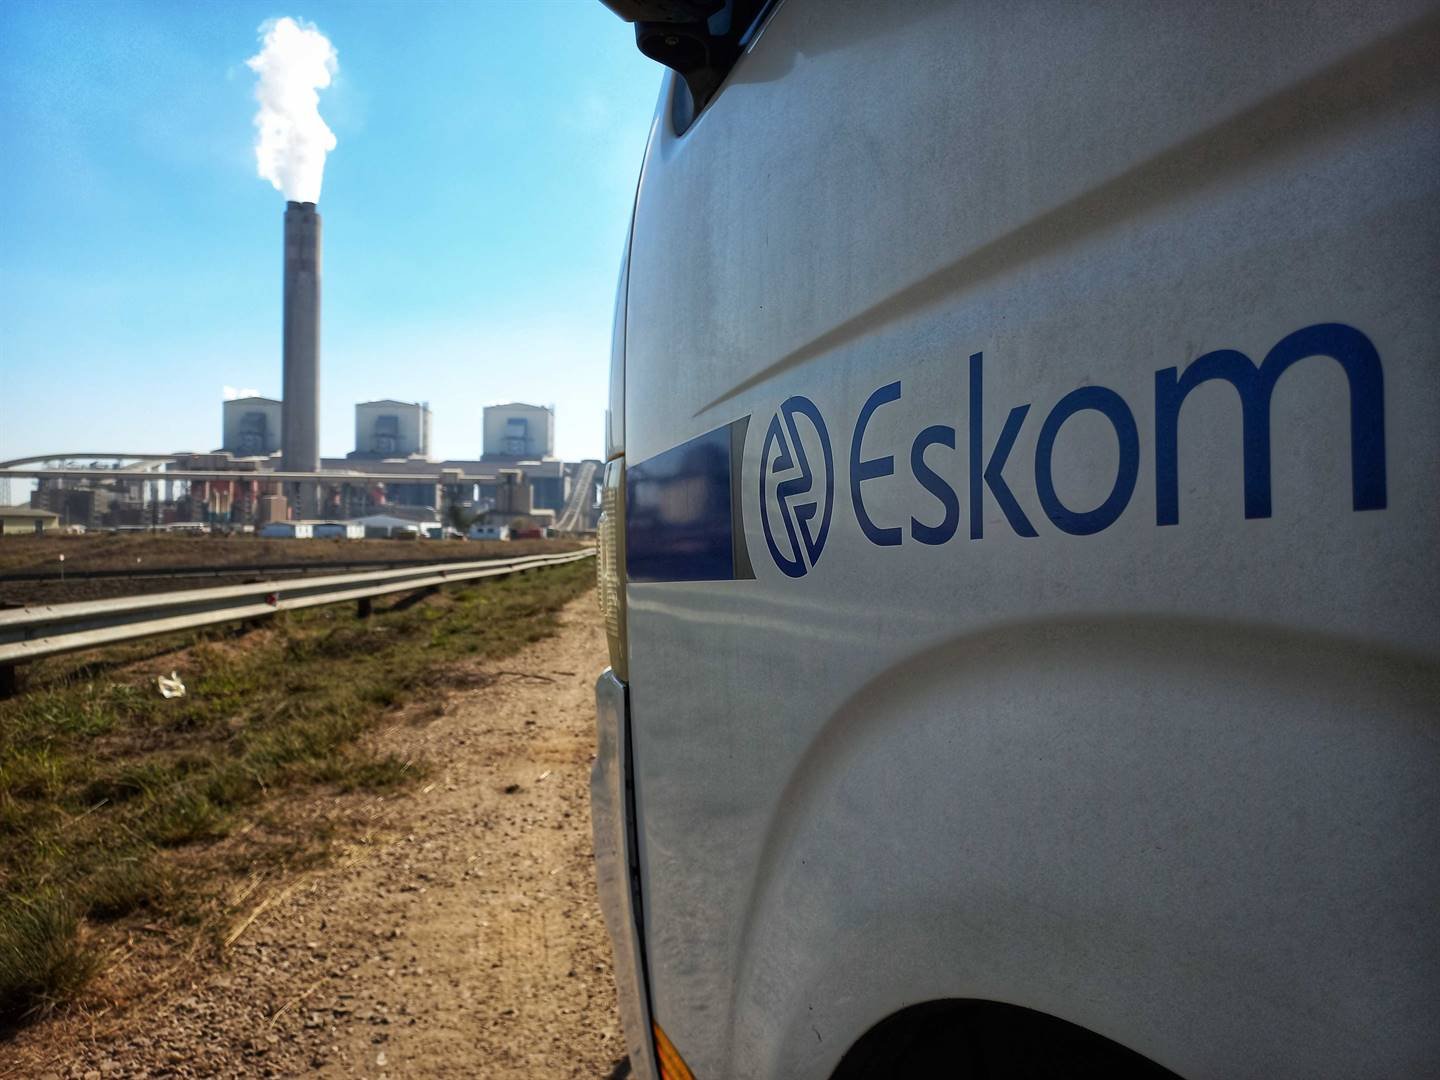 Eskom’s IPP programme faces hurdles as budget quotes expire amid load shedding uncertainty | City Press